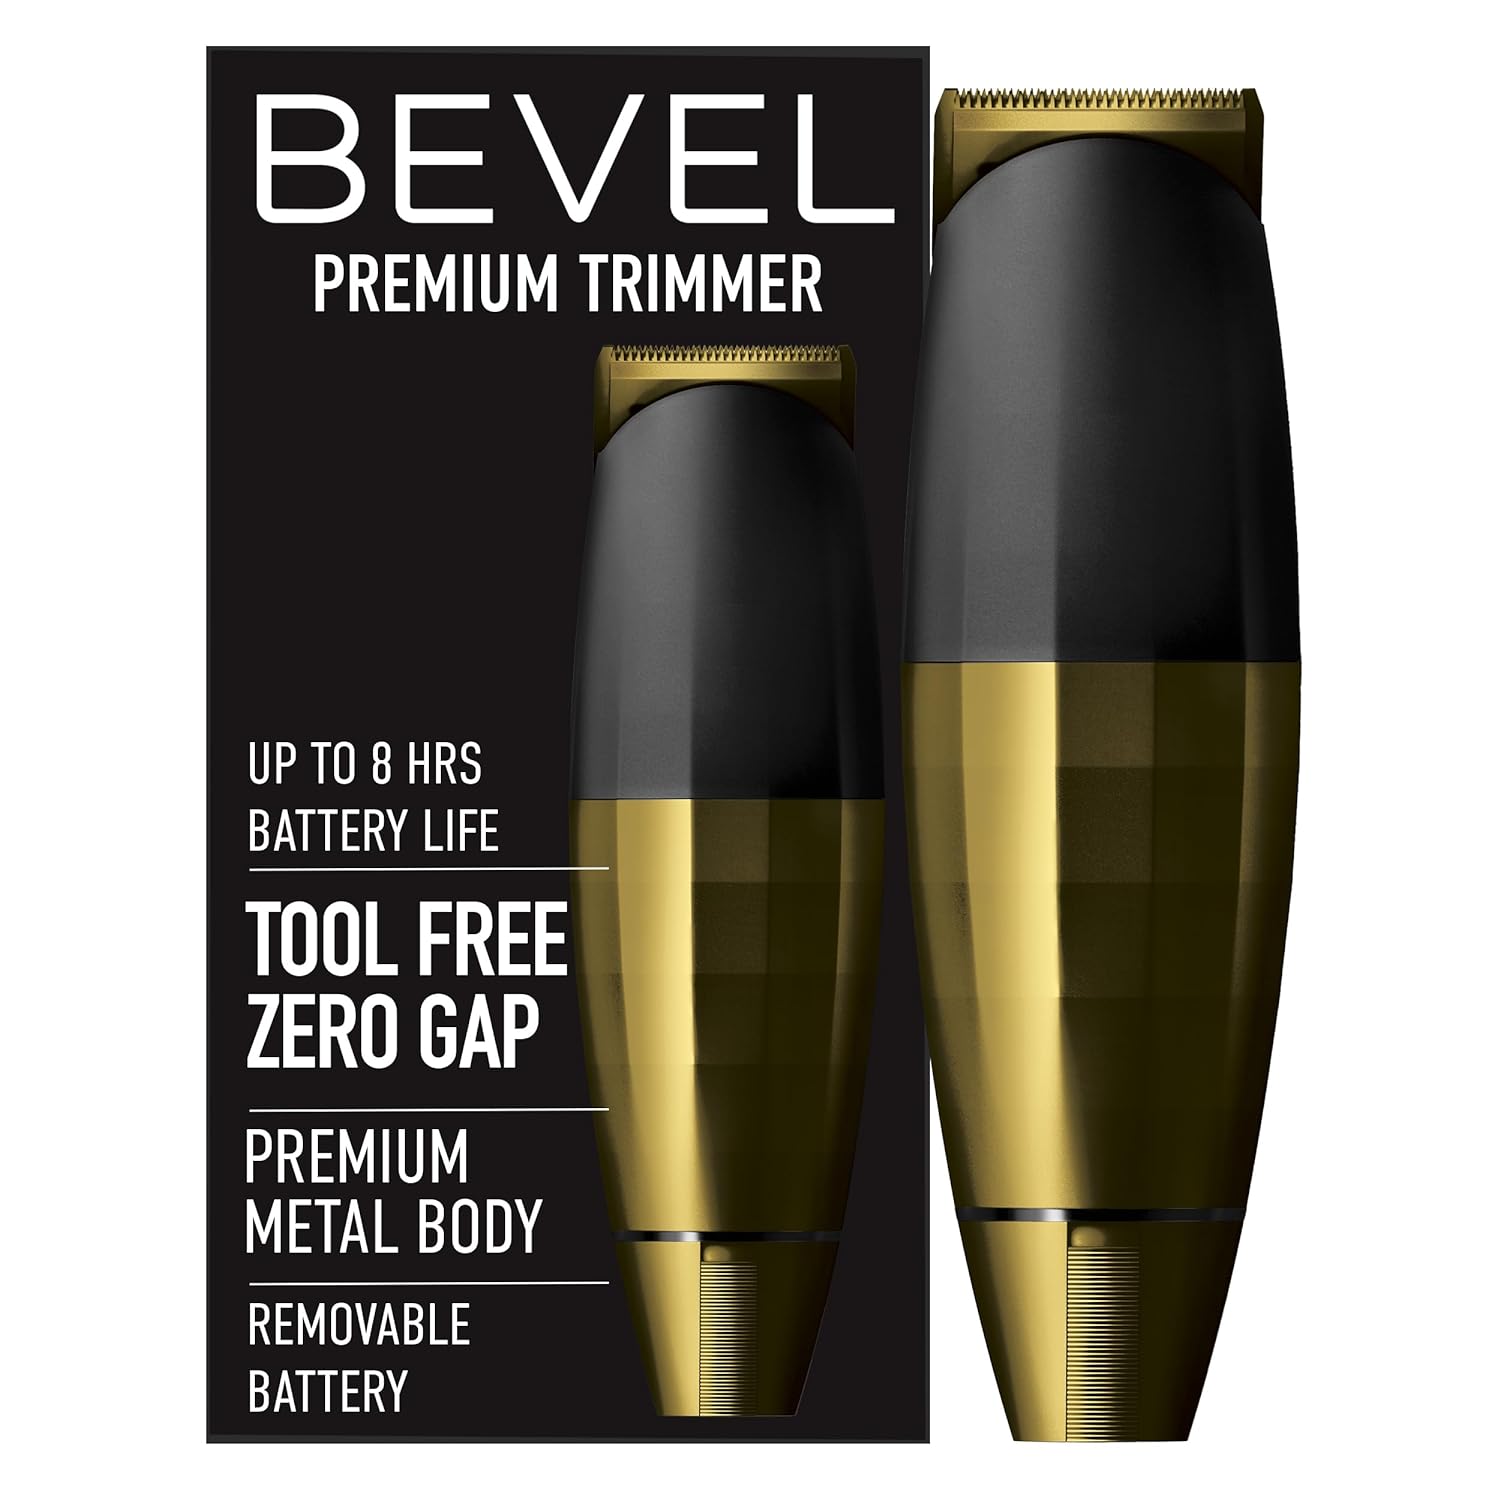 BEVEL Beard Trimmer for Men - Gold Edition Cordless Trimmer, 8 Hour Rechargeable Battery Life, Tool Free Adjustable Zero Gapped Blade, Barber Supplies, Mustache Trimmer